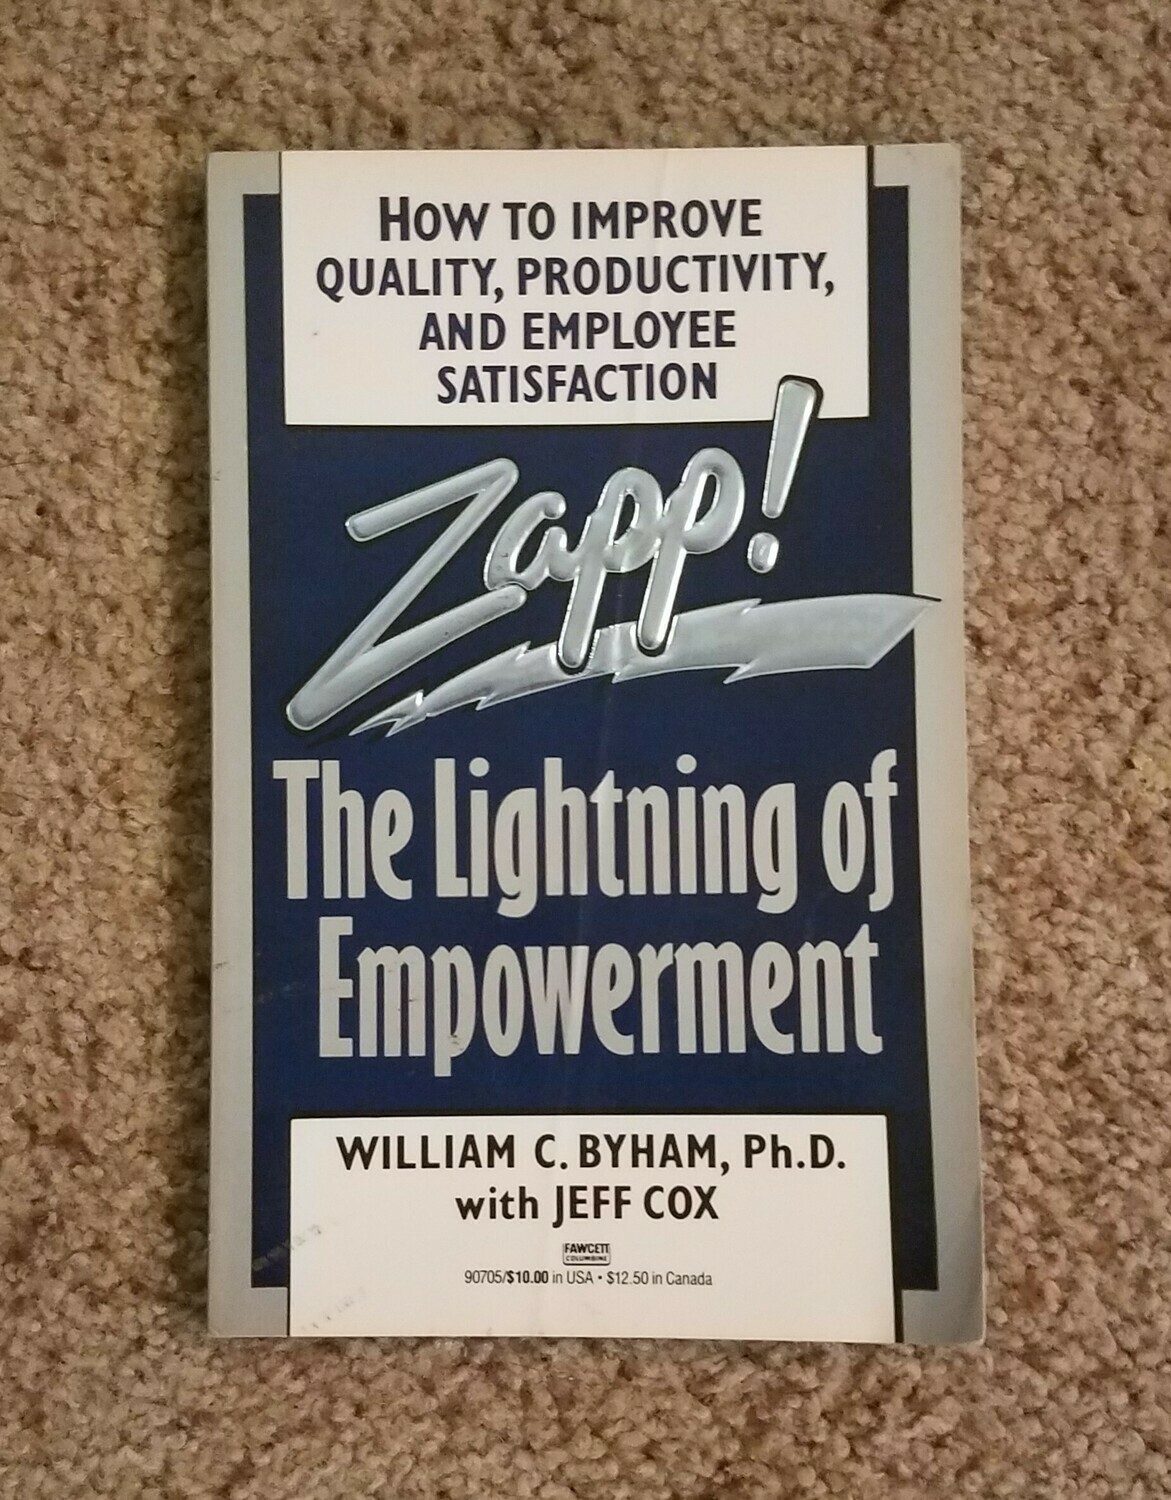 Zapp! The Lightning of Empowerment by William C. Byham, Ph.D. with Jeff Cox